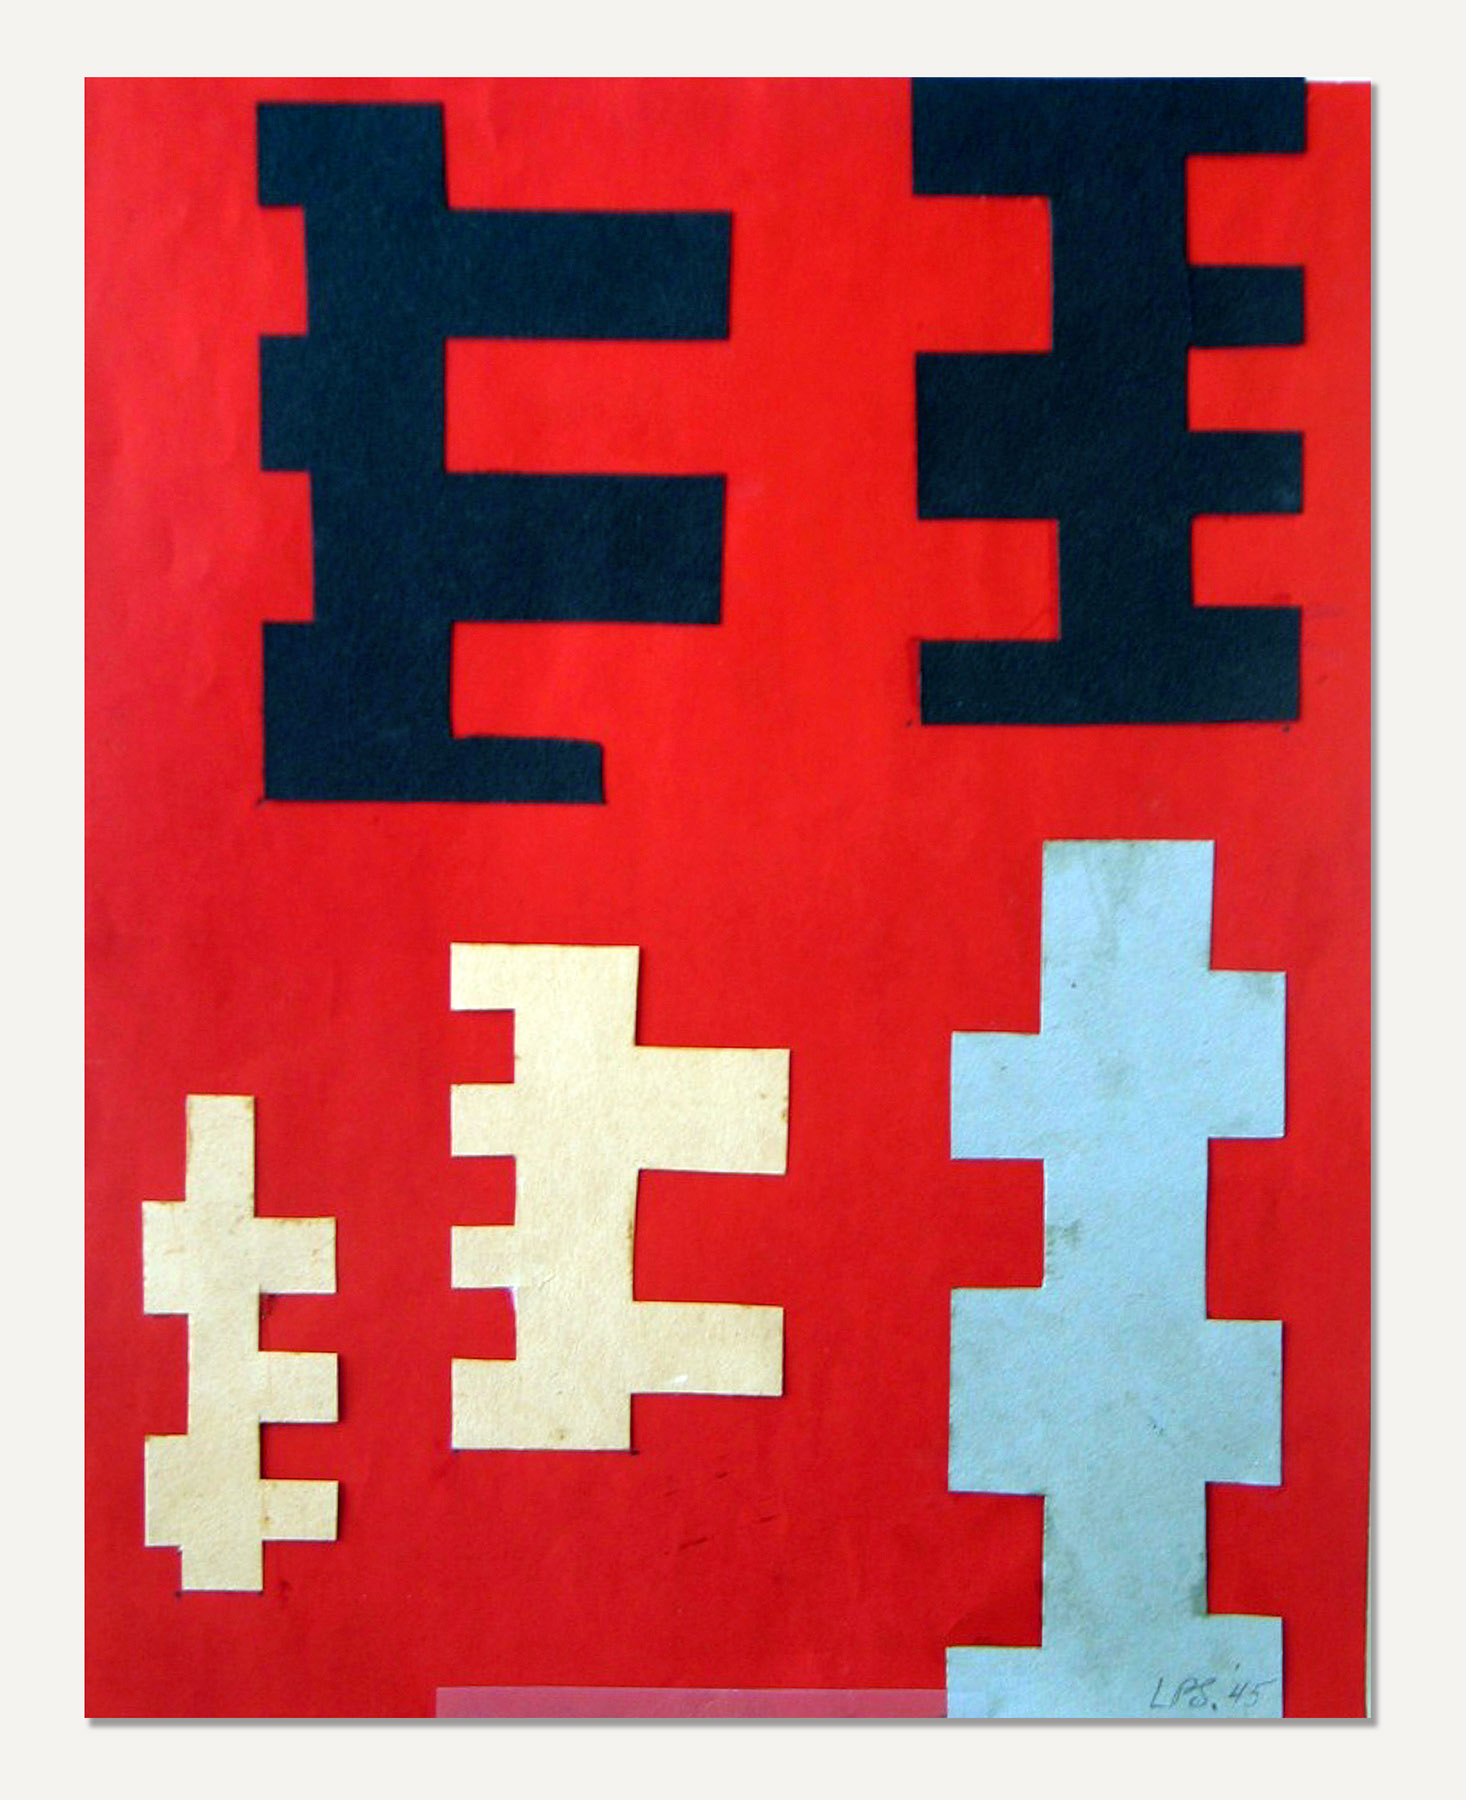 untitled, 1945. Colored paper on paper. Sheet Size: 13 1/2 x 11 in.